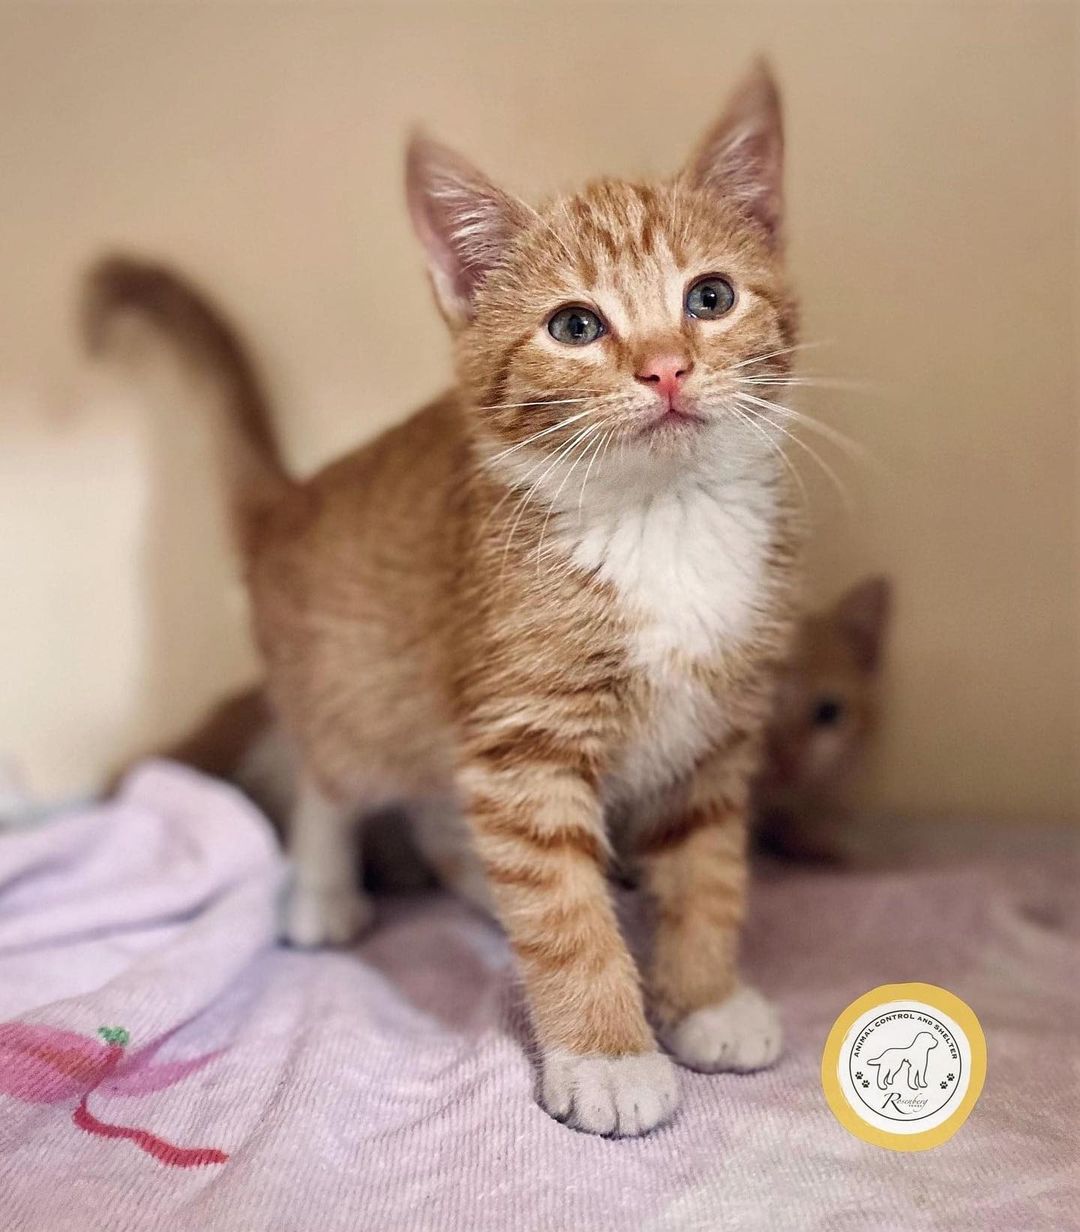 🐱😻 WE HAVE KITTENS! 😻🐱

Georgette, Trinh, and Lois are three among several cute babes we have available NOW at RACS! 

ALL adoption fees have been reduced to $25. No appointments are required — just come visit!

📲 Browse our adoptables:
https://bit.ly/bergshelterpets

📩 Foster: https://buff.ly/3d71HpY
📩 Adopt: https://buff.ly/38X4Bul

💛 Rosenberg Animal Shelter
1207 Blume Road⠀
Rosenberg, Texas 77471
⌚️ 11AM - 6PM M-F, 11AM - 4PM Sat
832-595-3490 (Main Line)
832-449-8624 (Text ONLY Line)
📨 MHARTSELL@ROSENBERGTX.GOV